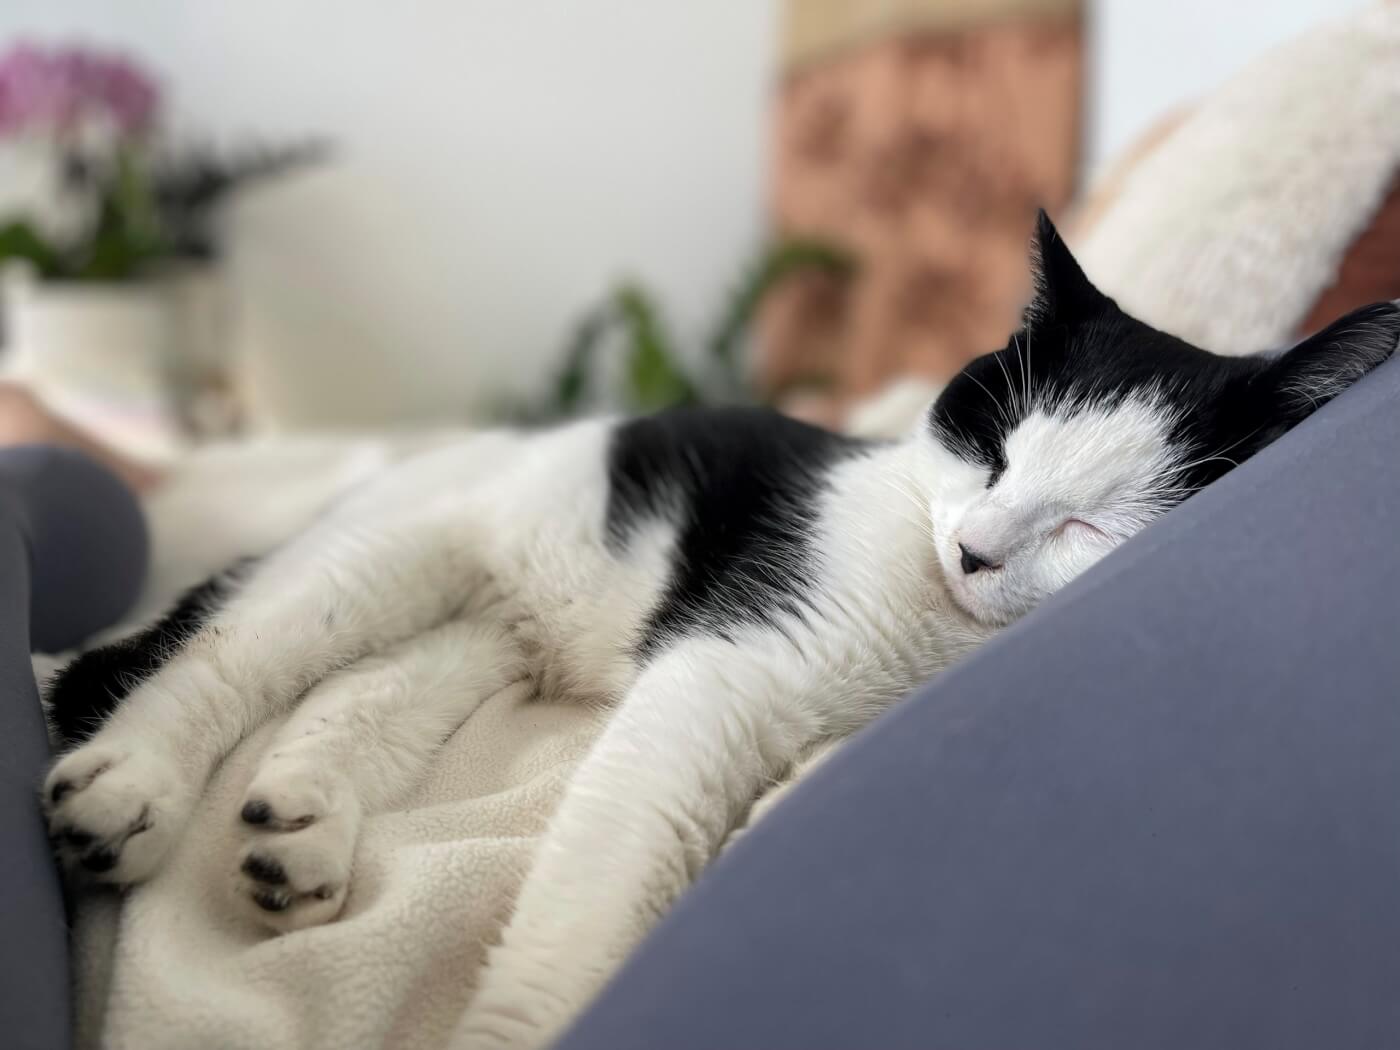 Kumar, a black and white cat, sleeps on a couch